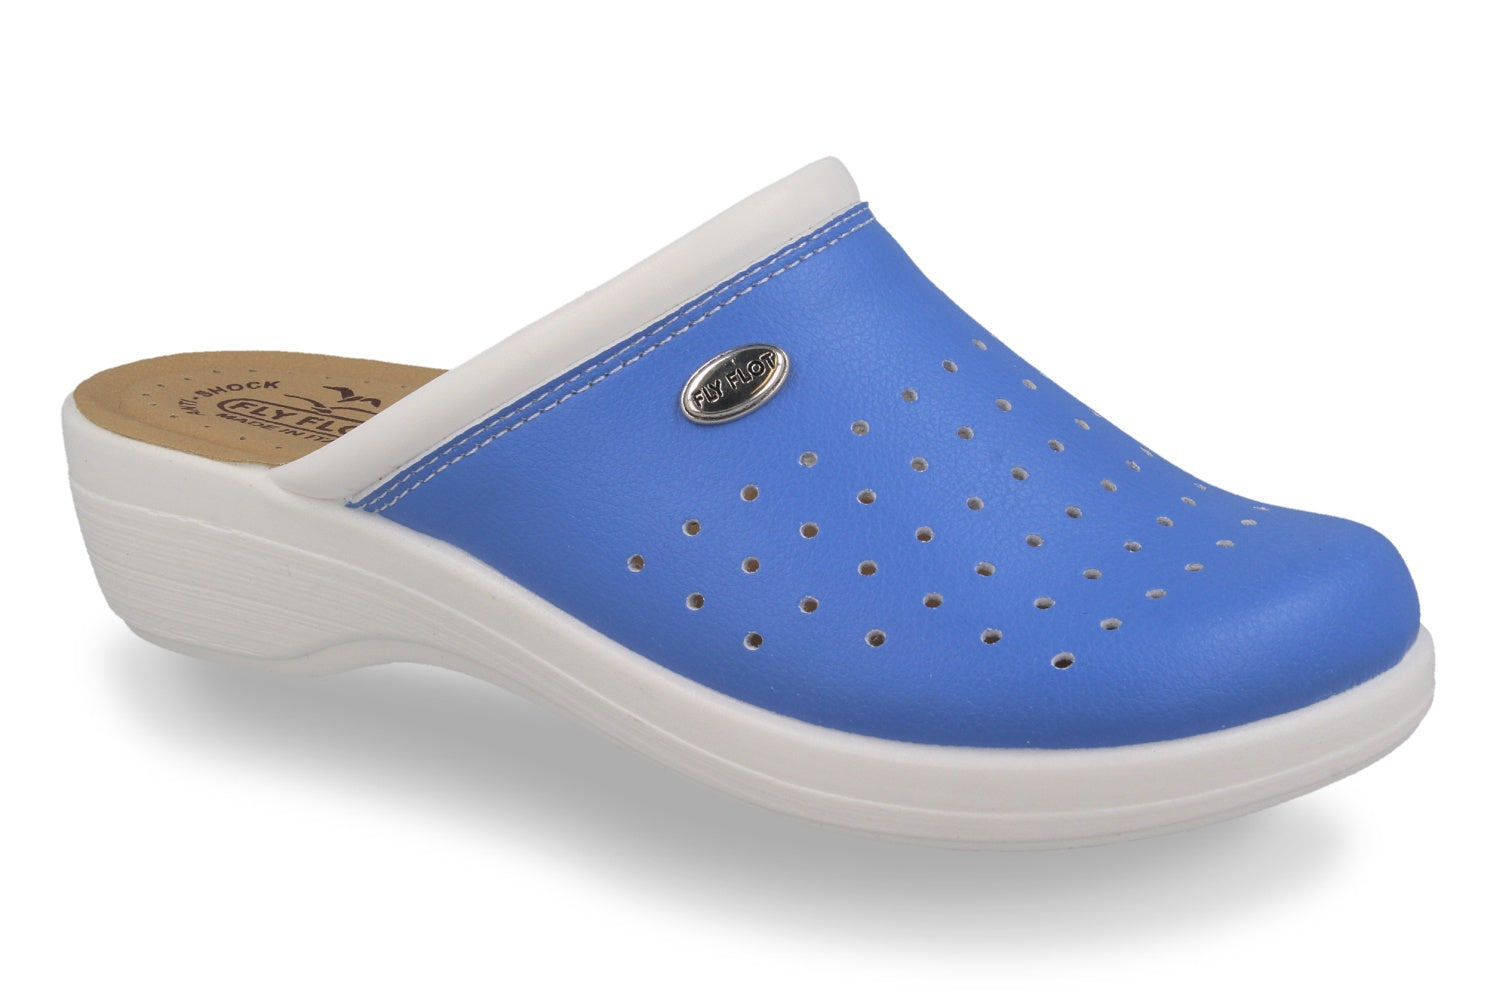 See the Light Blue Professional  With Faux Leather Upper And Insole Women Clogs in the colour LIGHT BLUE, available in various sizes